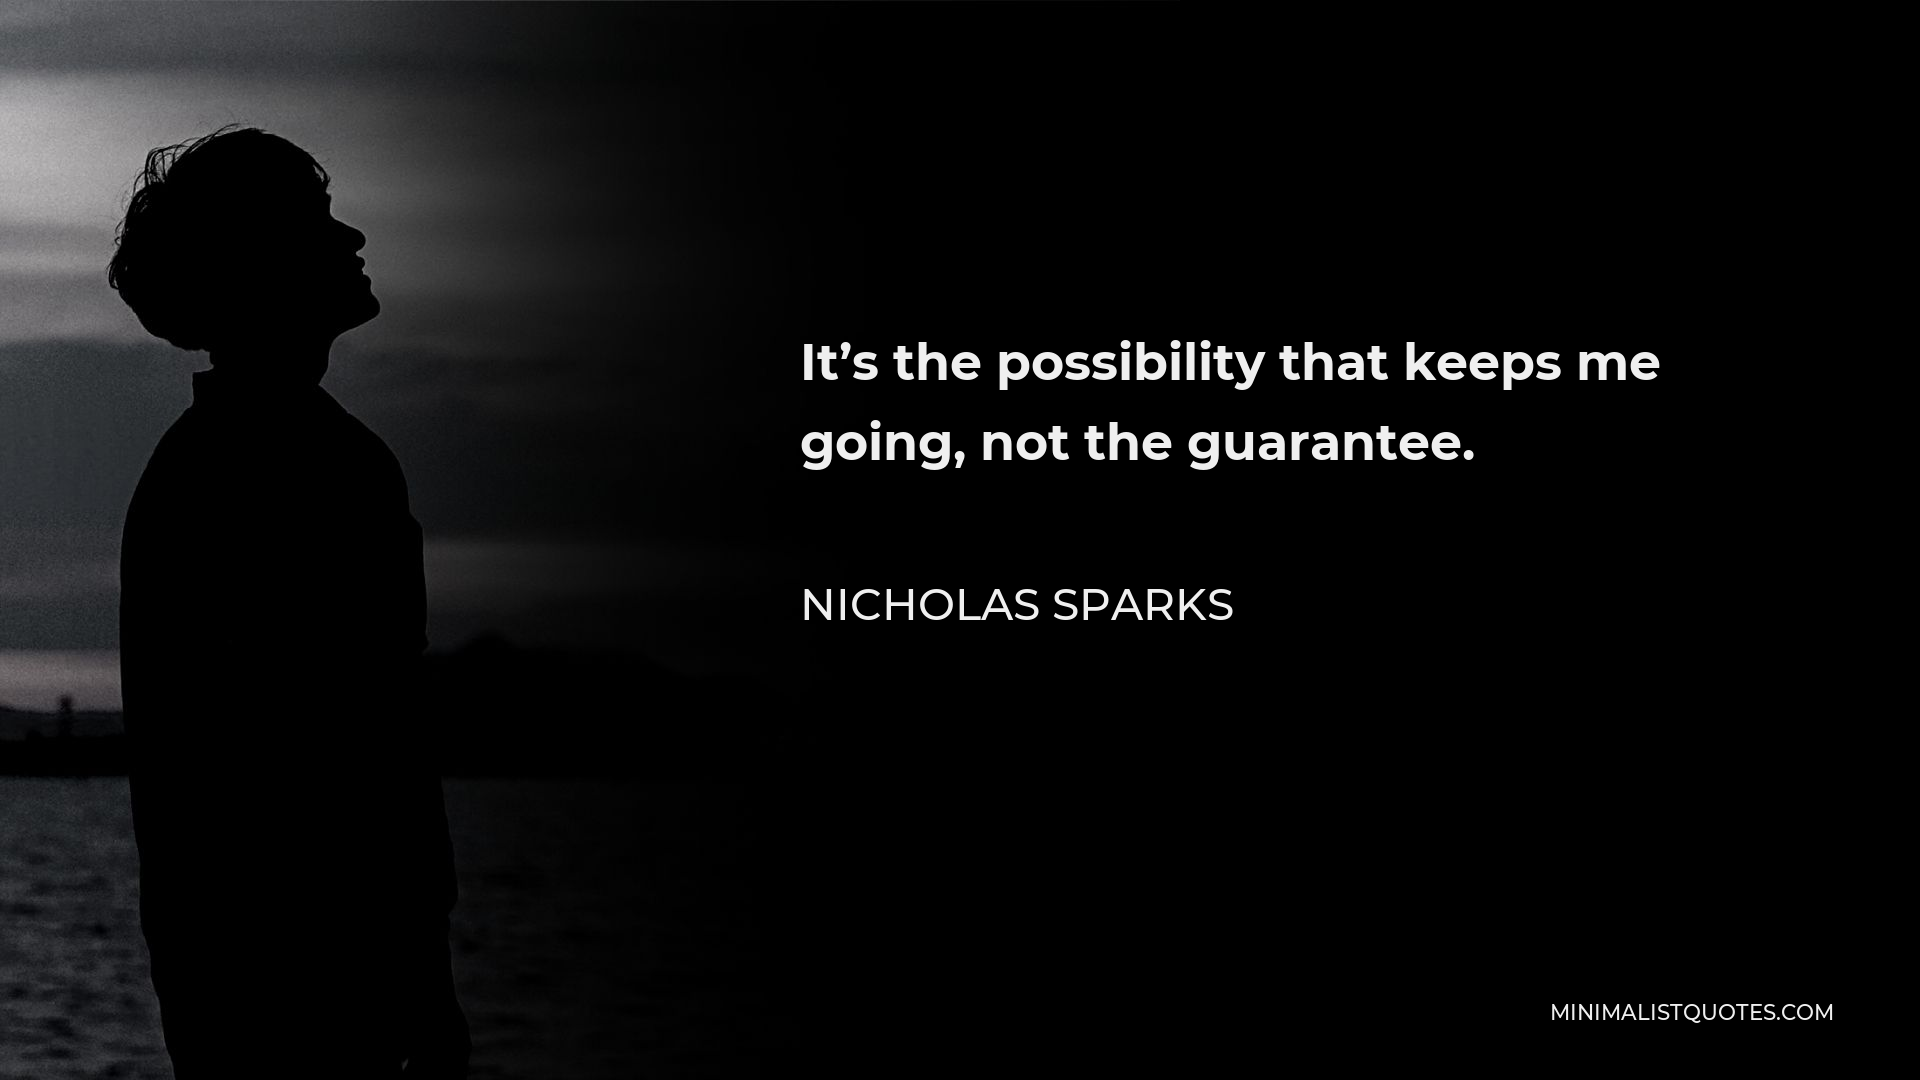 Nicholas Sparks Quote - It’s the possibility that keeps me going, not the guarantee.